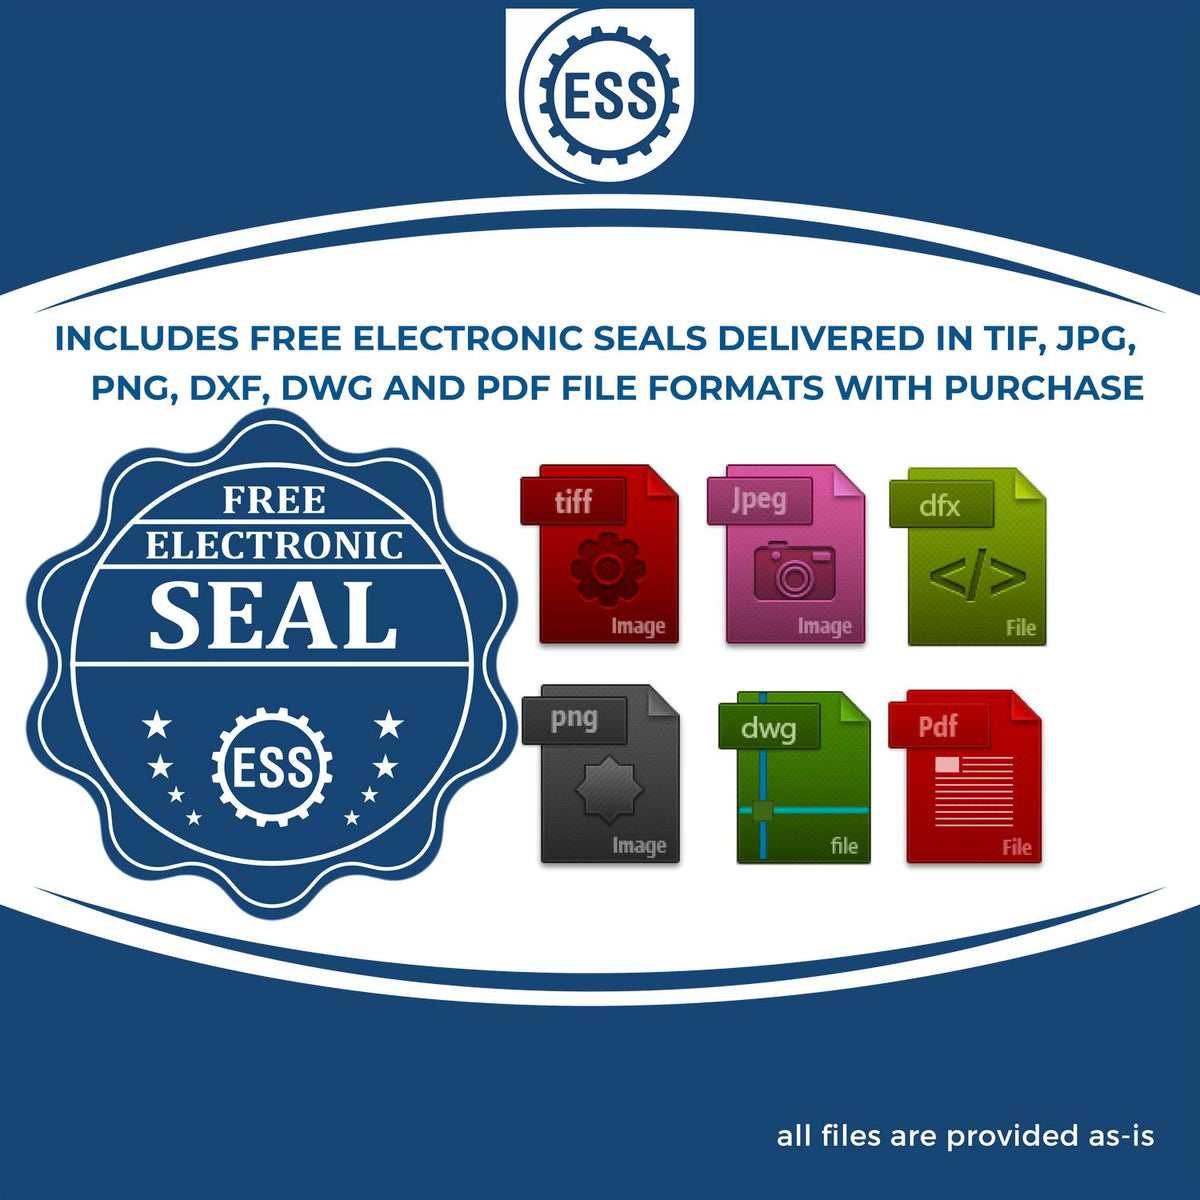 An infographic for the free electronic seal for the Gift Alabama Engineer Seal illustrating the different file type icons such as DXF, DWG, TIF, JPG and PNG.